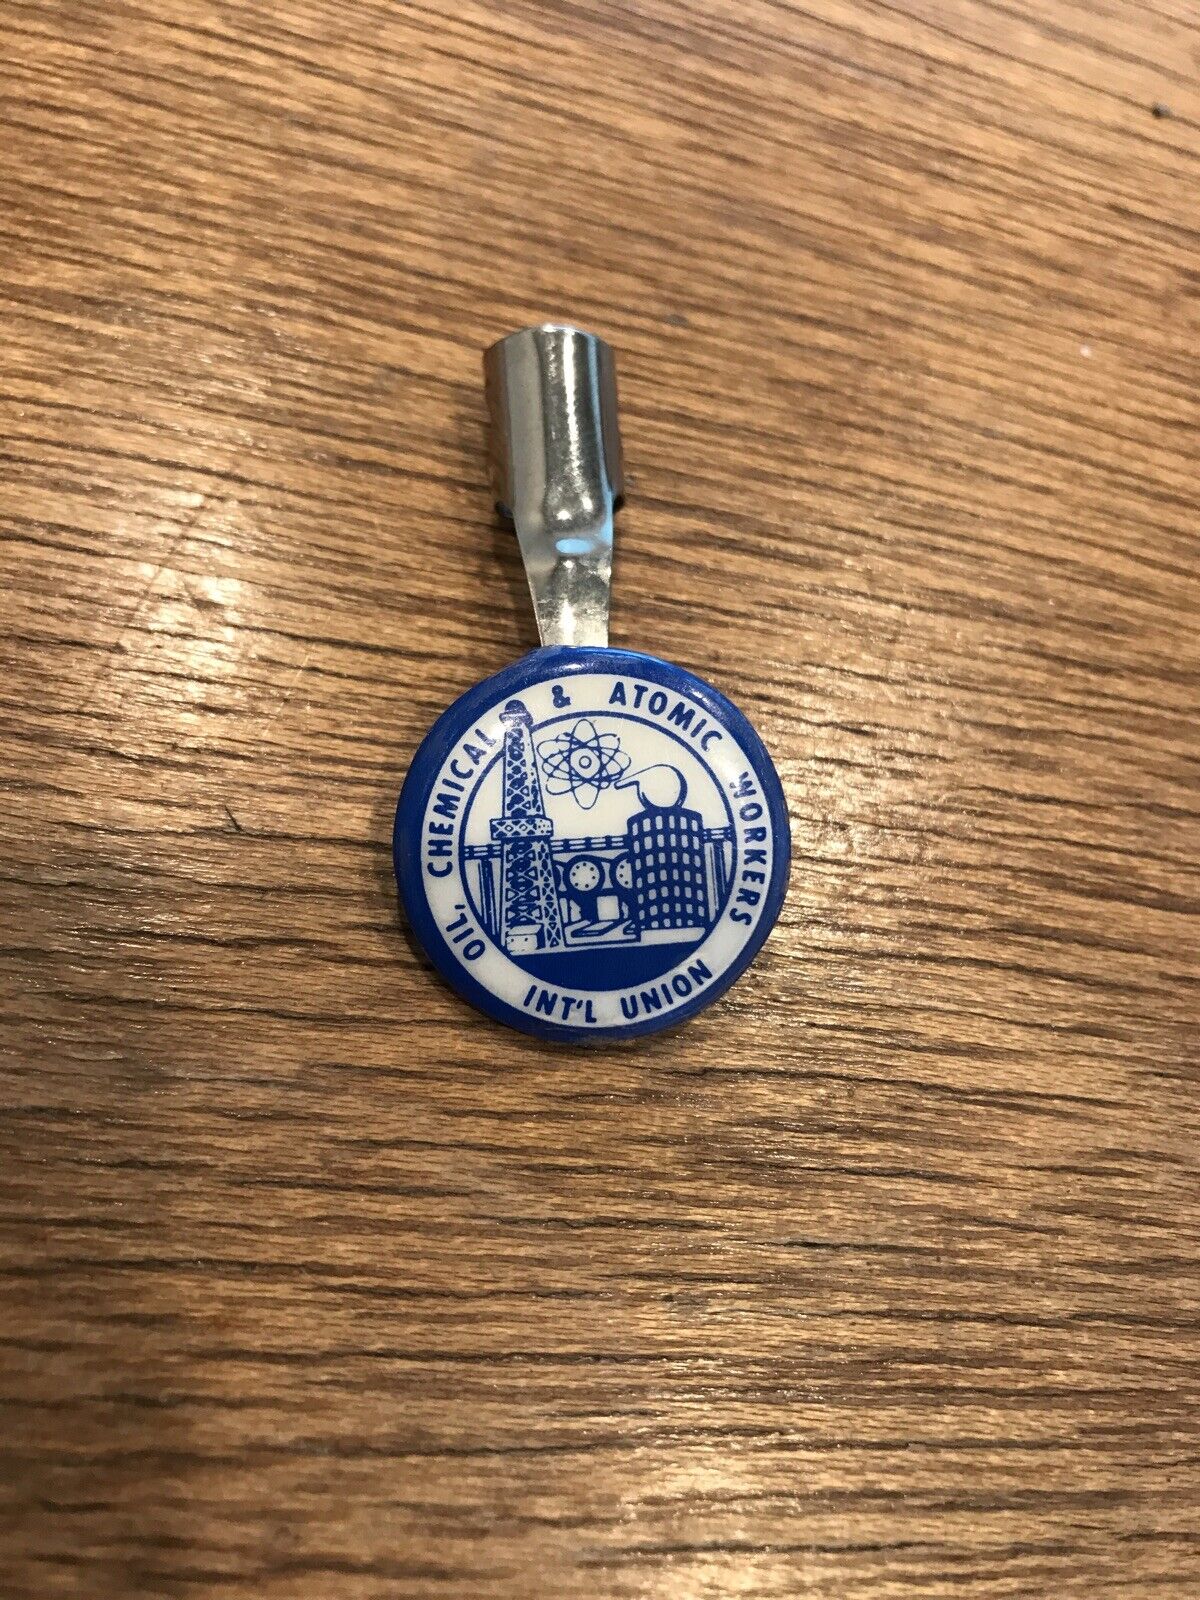 1950s Oil Chemical and Atomic Worker International Union Pen Pencil Clip Vintage